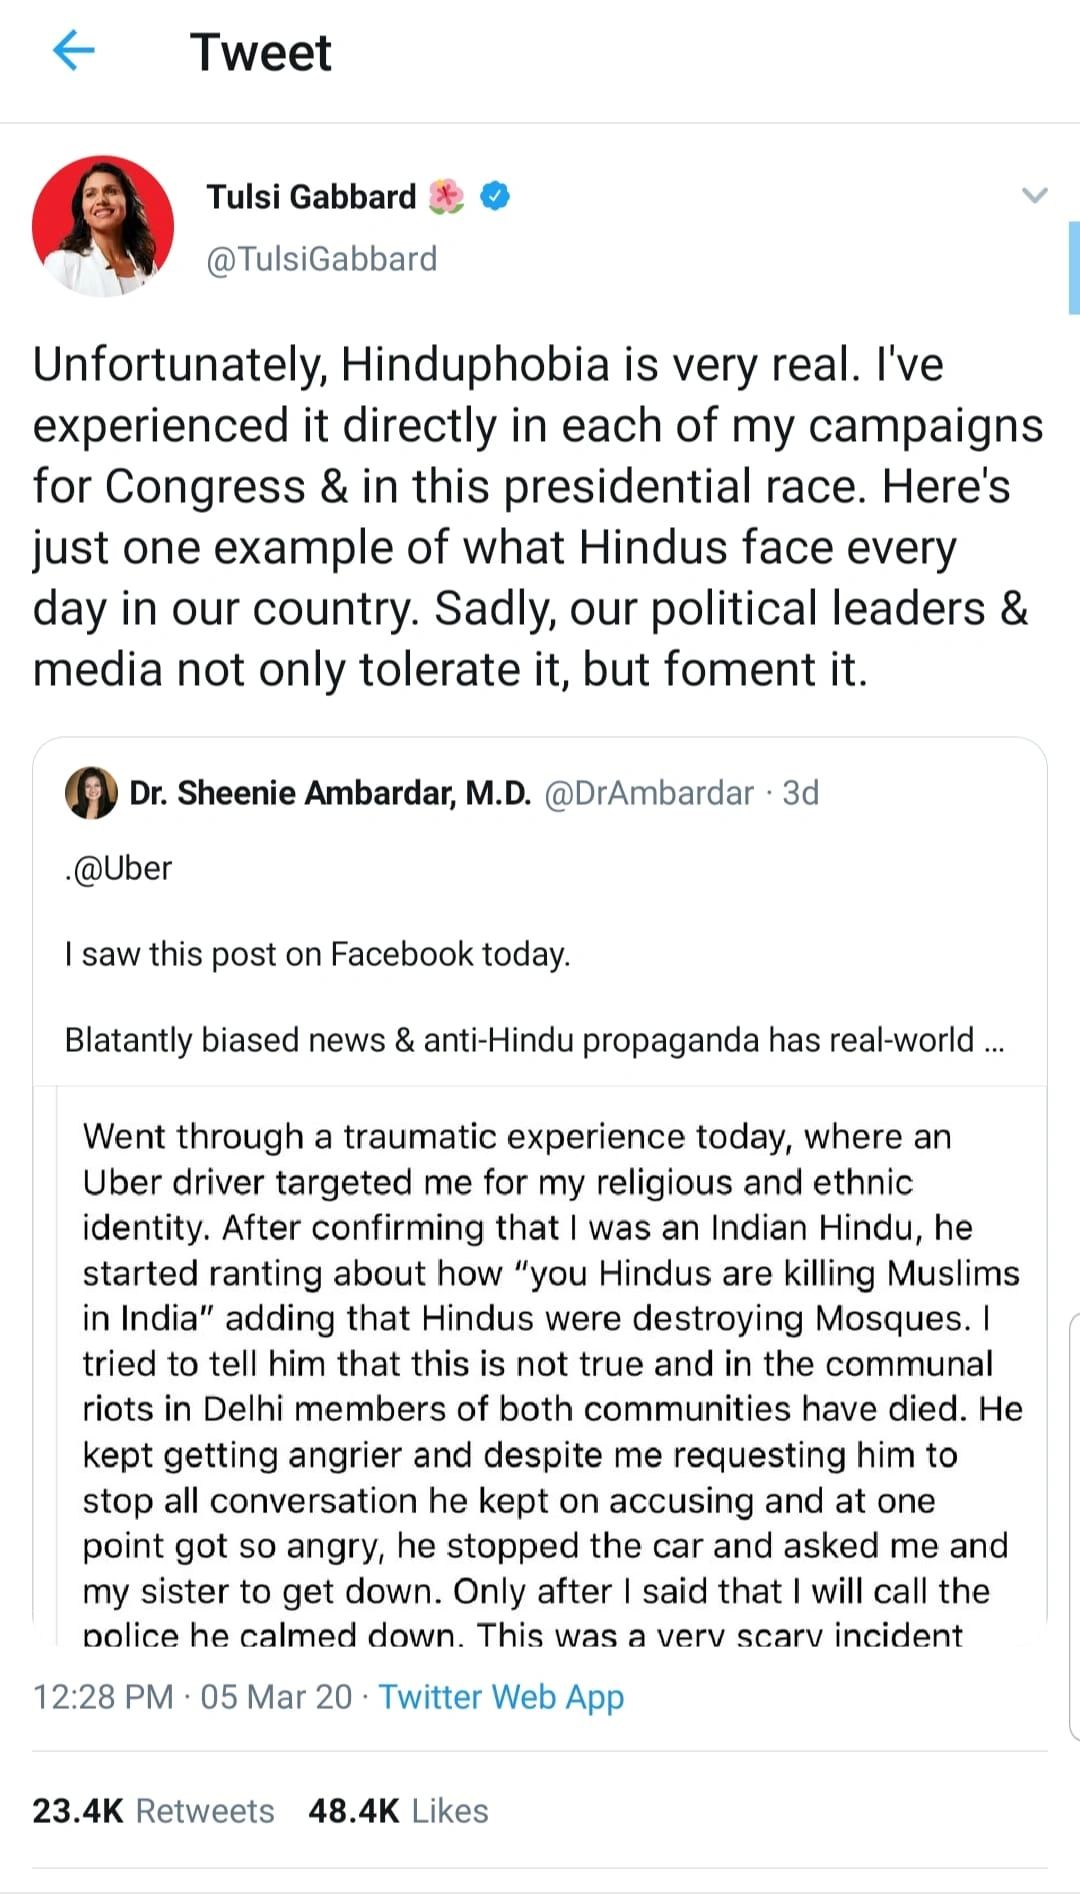 Rep Tulsi Gabbard, US Presidential candidate and a Hindu, expresses her feelings about Hinduphobia